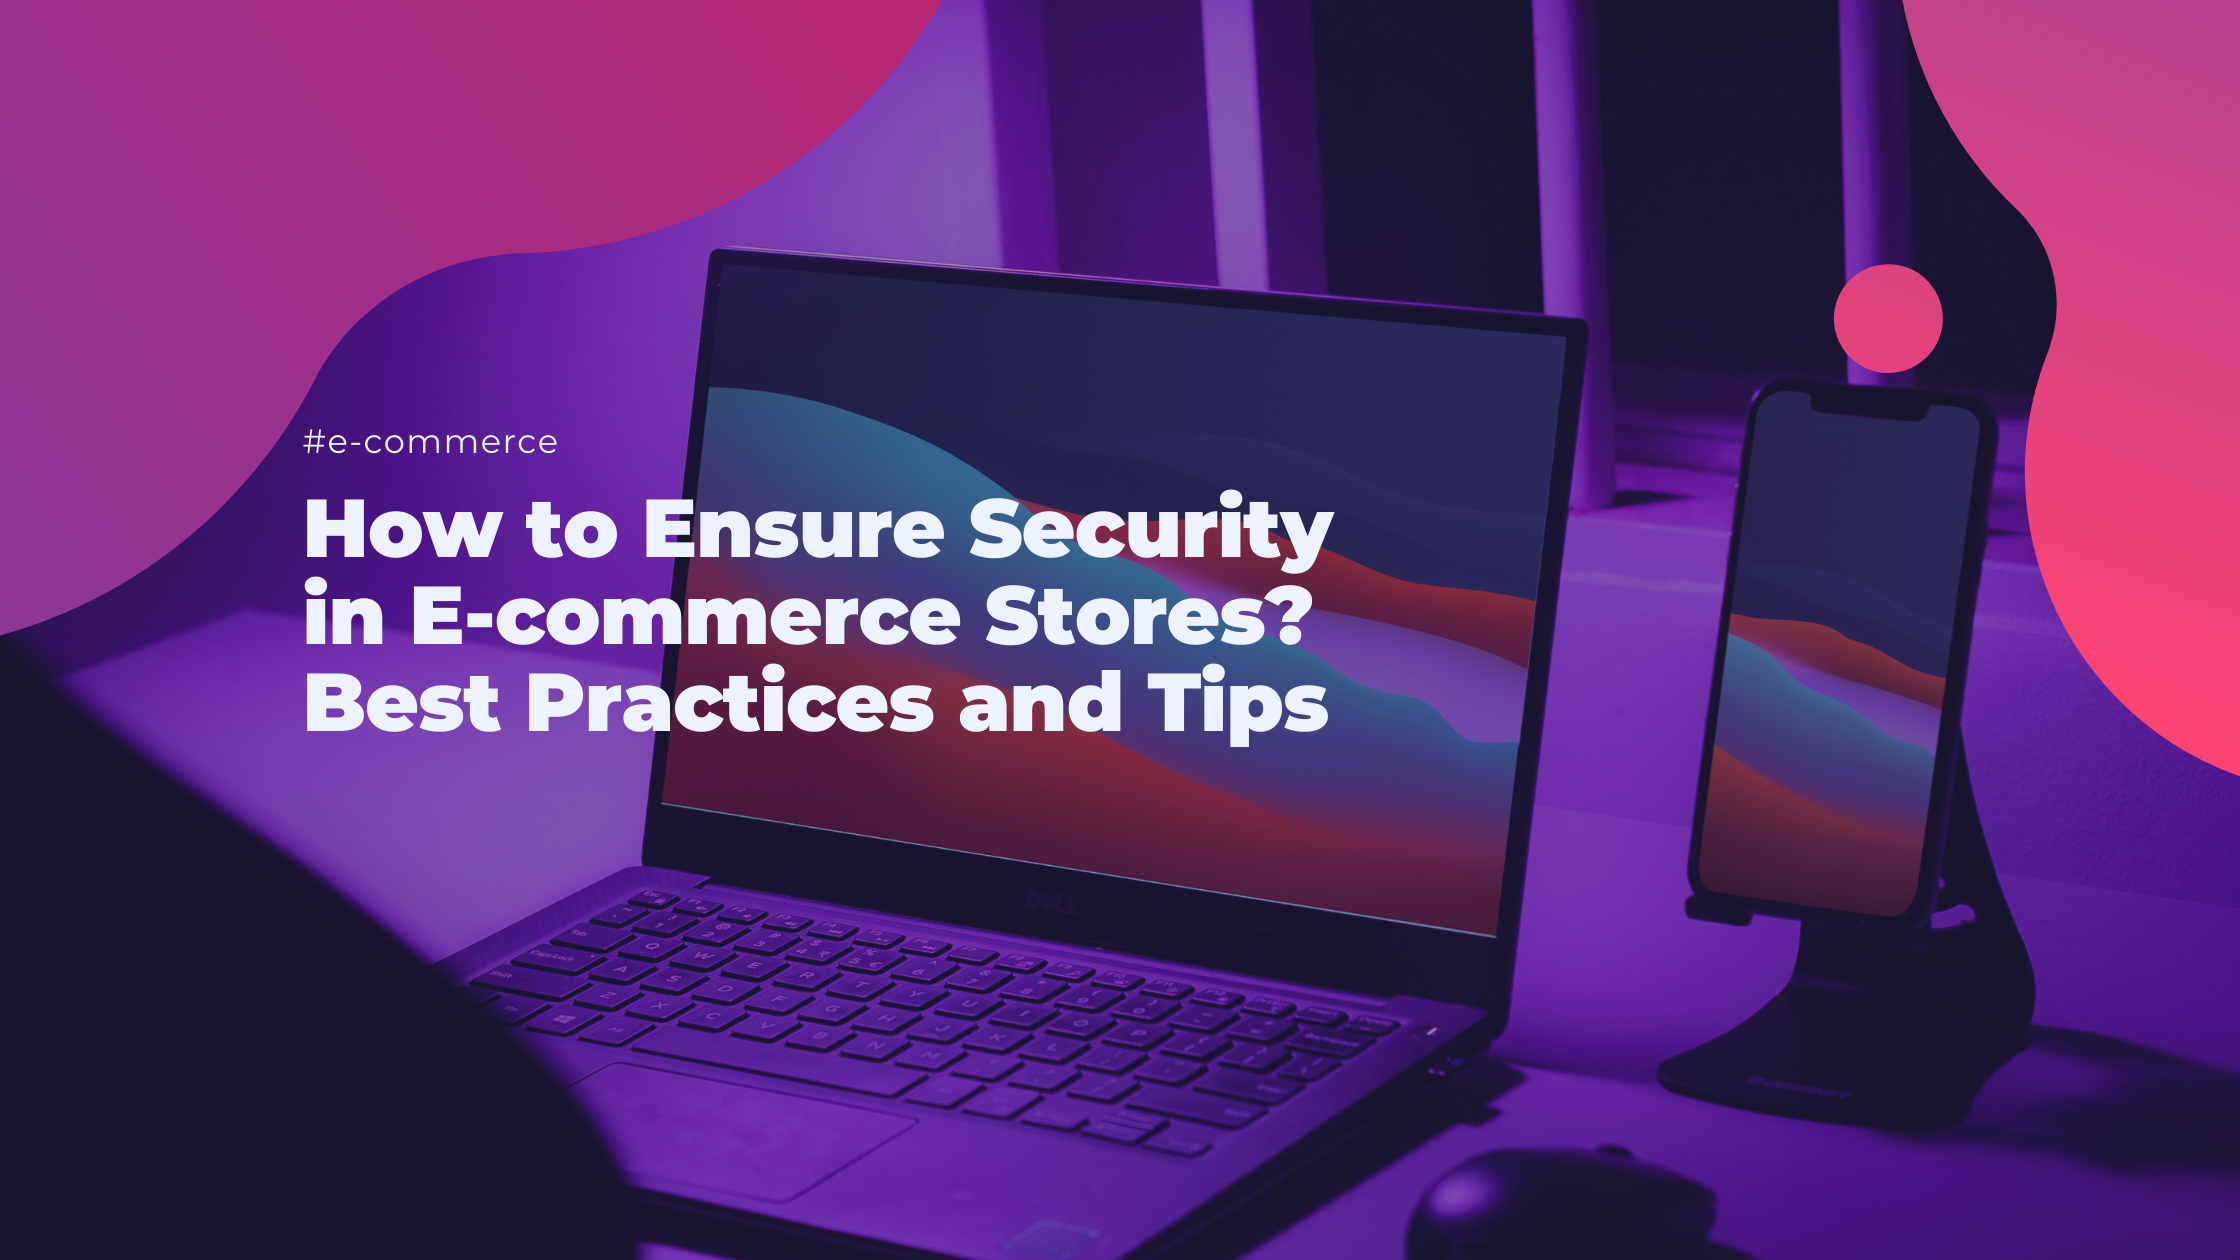 How to ensure security in E-commerce stores? Best practices and tips